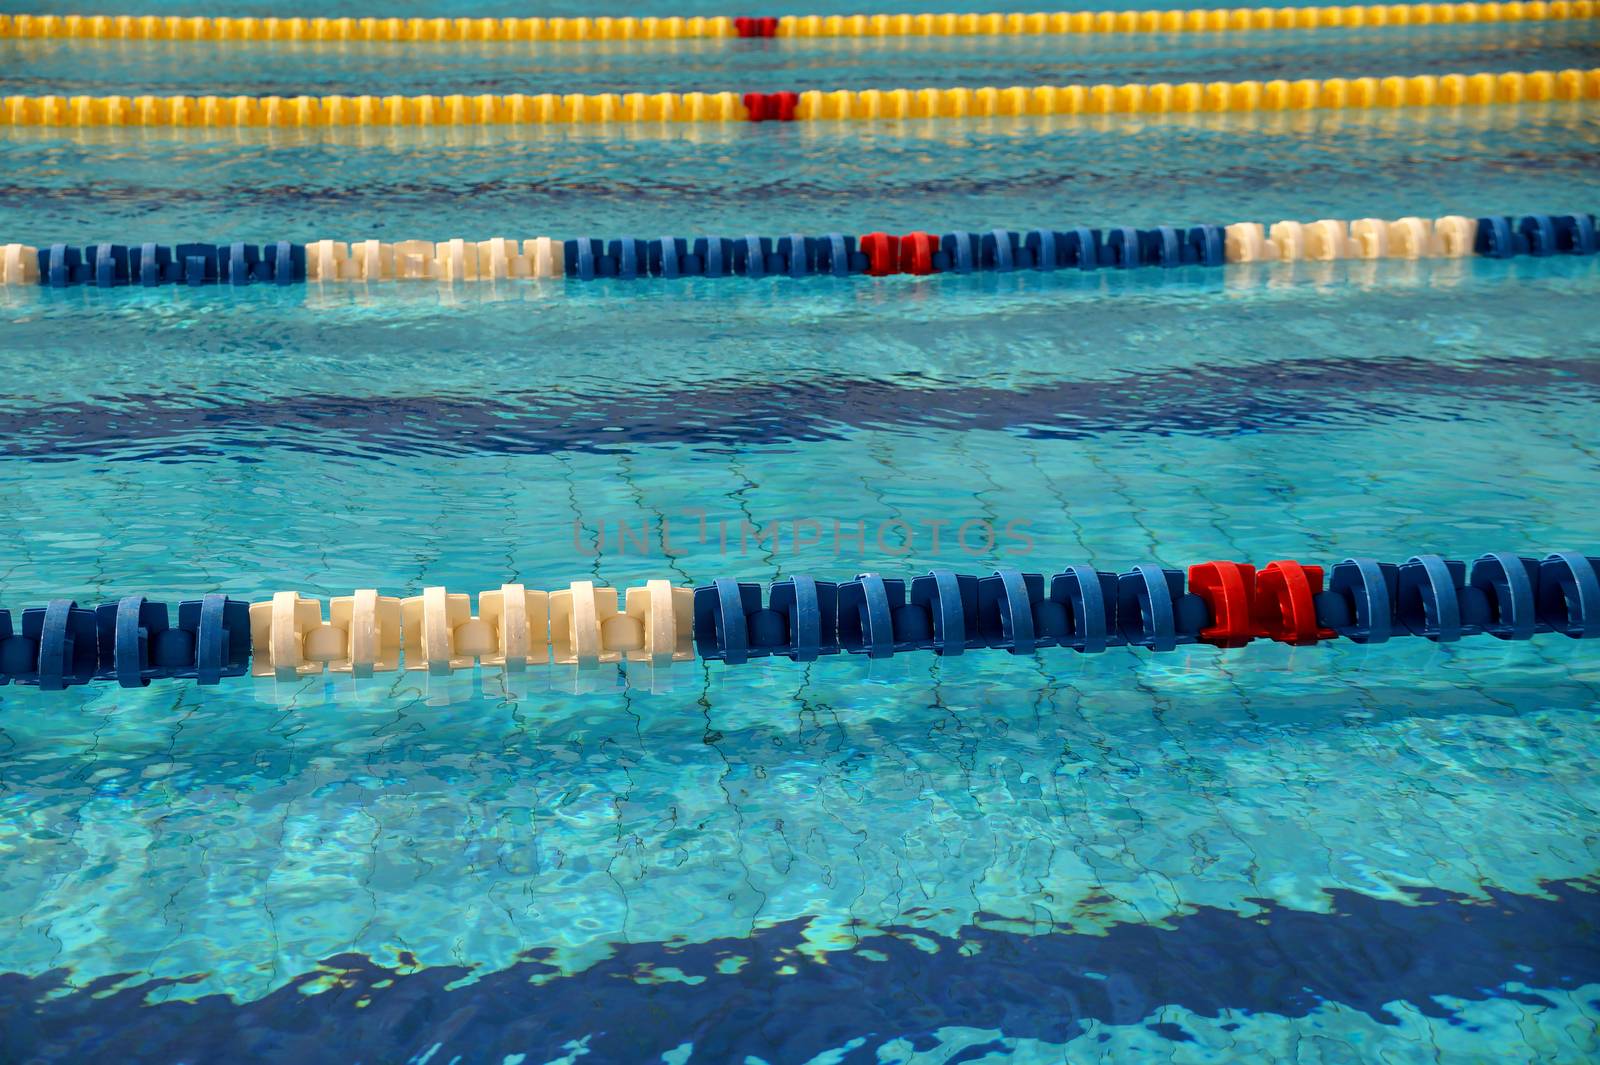 Dividers of paths in the big swimming pool by Vadimdem